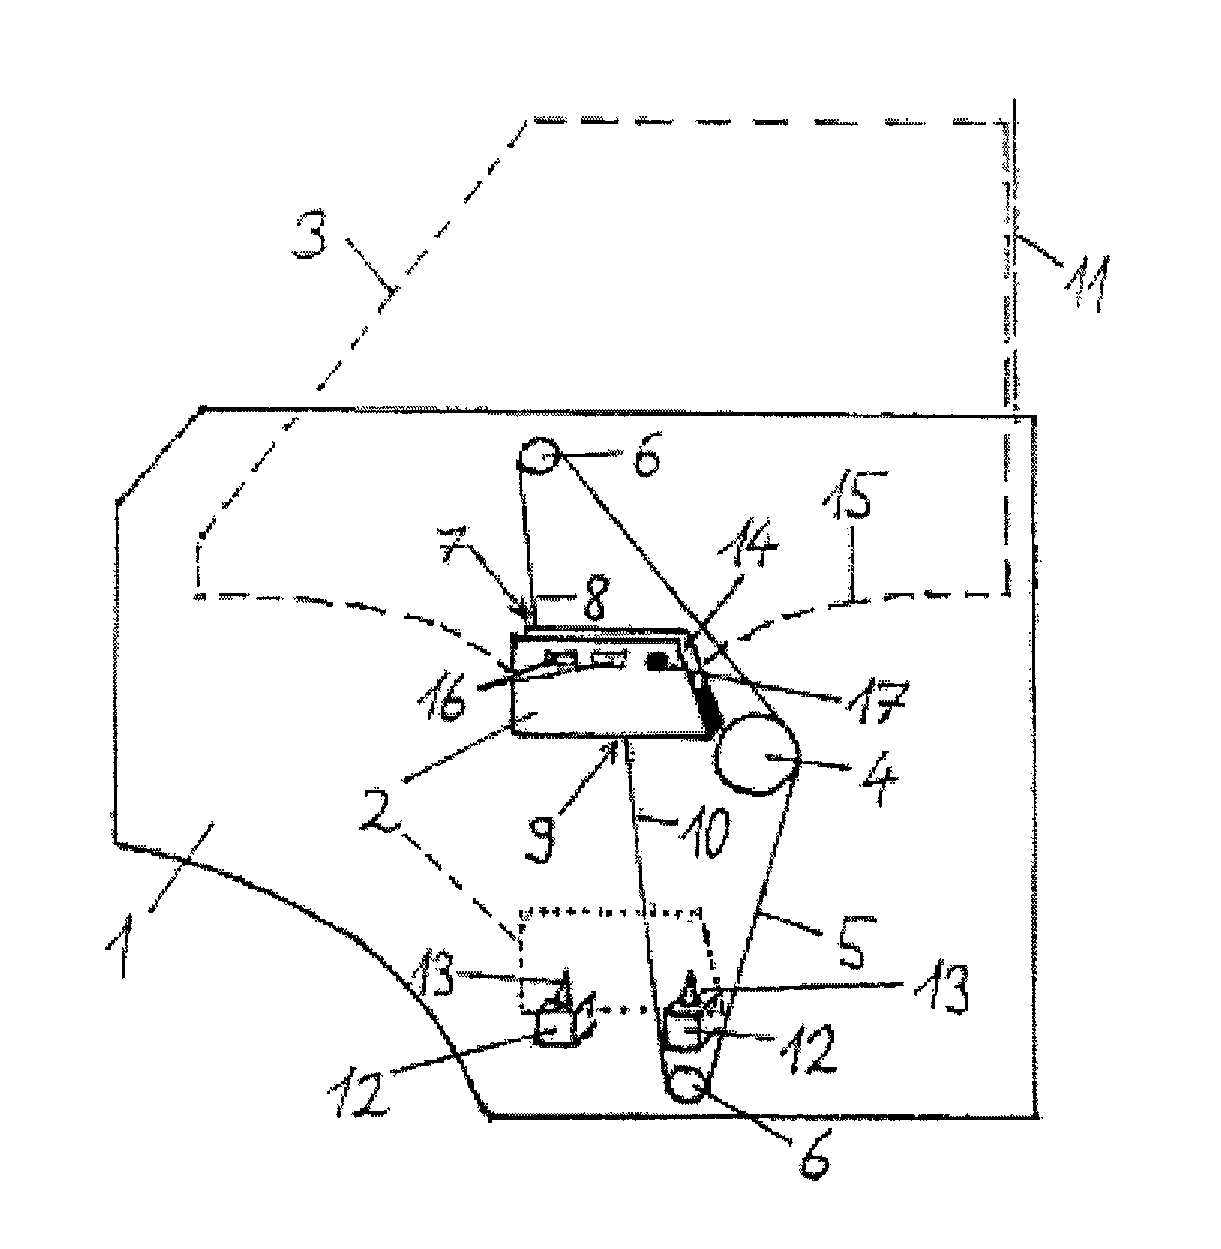 Window lift system and method for fitting a window pane